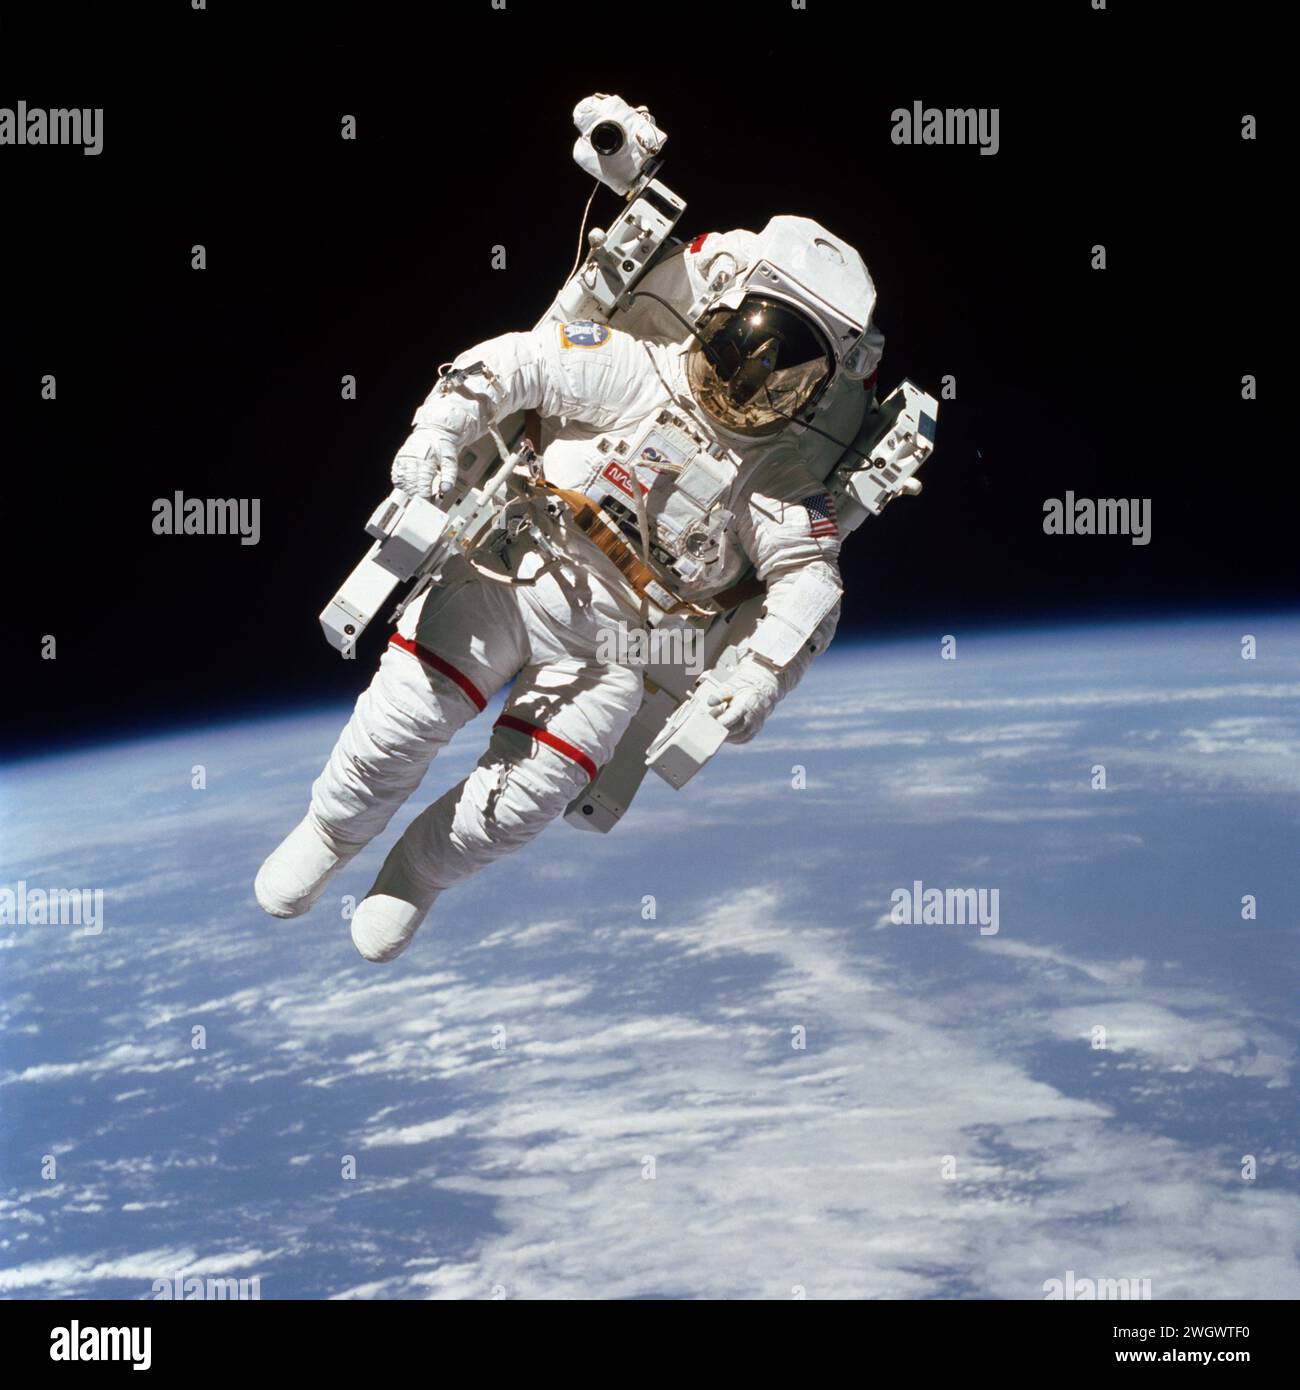 S84-27562 (7 Feb. 1984) --- Astronaut Bruce McCandless II, participating in a historical Extravehicular Activity (EVA), is a few meters away from the cabin of the Earth-orbiting space shuttle Challenger in this 70mm frame. This Extravehicular Activity (EVA) represented the first use of a nitrogen-propelled, hand-controlled device called the Manned Maneuvering Unit (MMU), which allows for much greater mobility than that afforded previous spacewalkers who had to use restrictive tethers. Robert L. Stewart later tried out the MMU McCandless is using here, Stock Photo